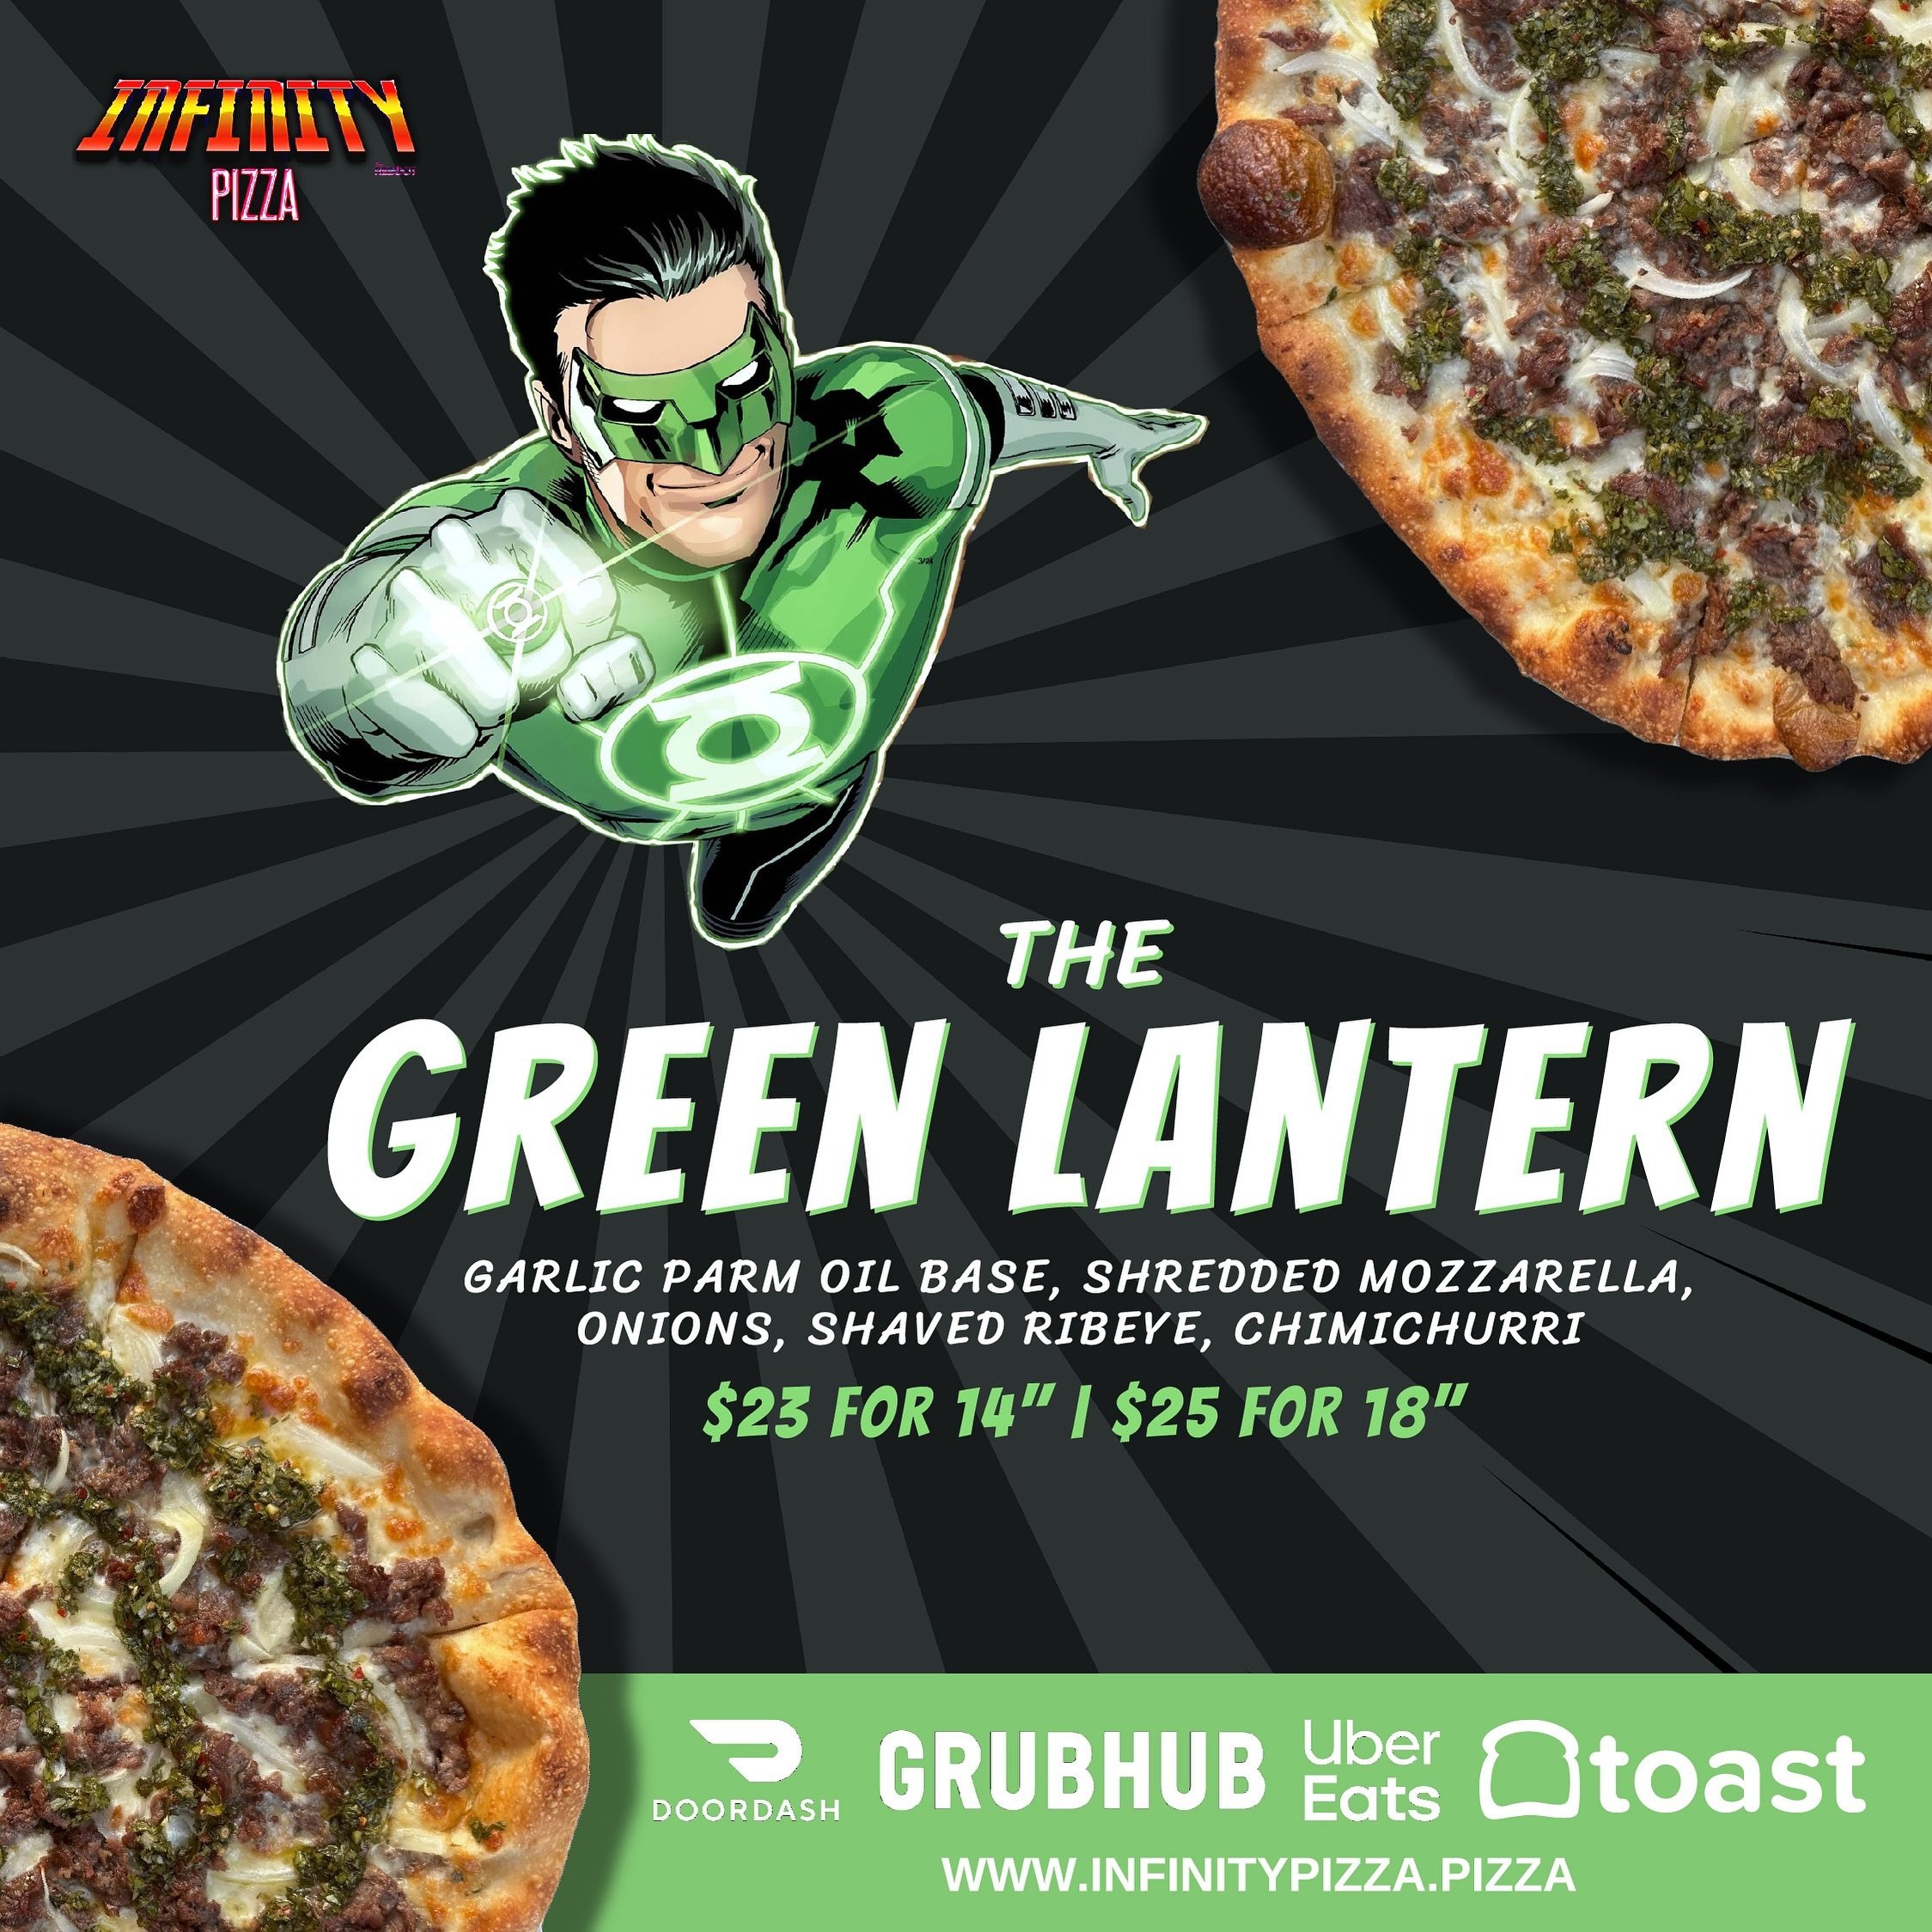 Get it while it&rsquo;s hot! 

Our newest special, The Green Lantern is drooling worthy featuring a garlic parm oil base, shredded ribeye, onions, and chimichurri 🤤 
Grab a 14&rdquo; for $23 for or an 18&rdquo; for $25.

Treat yourself this weekend,